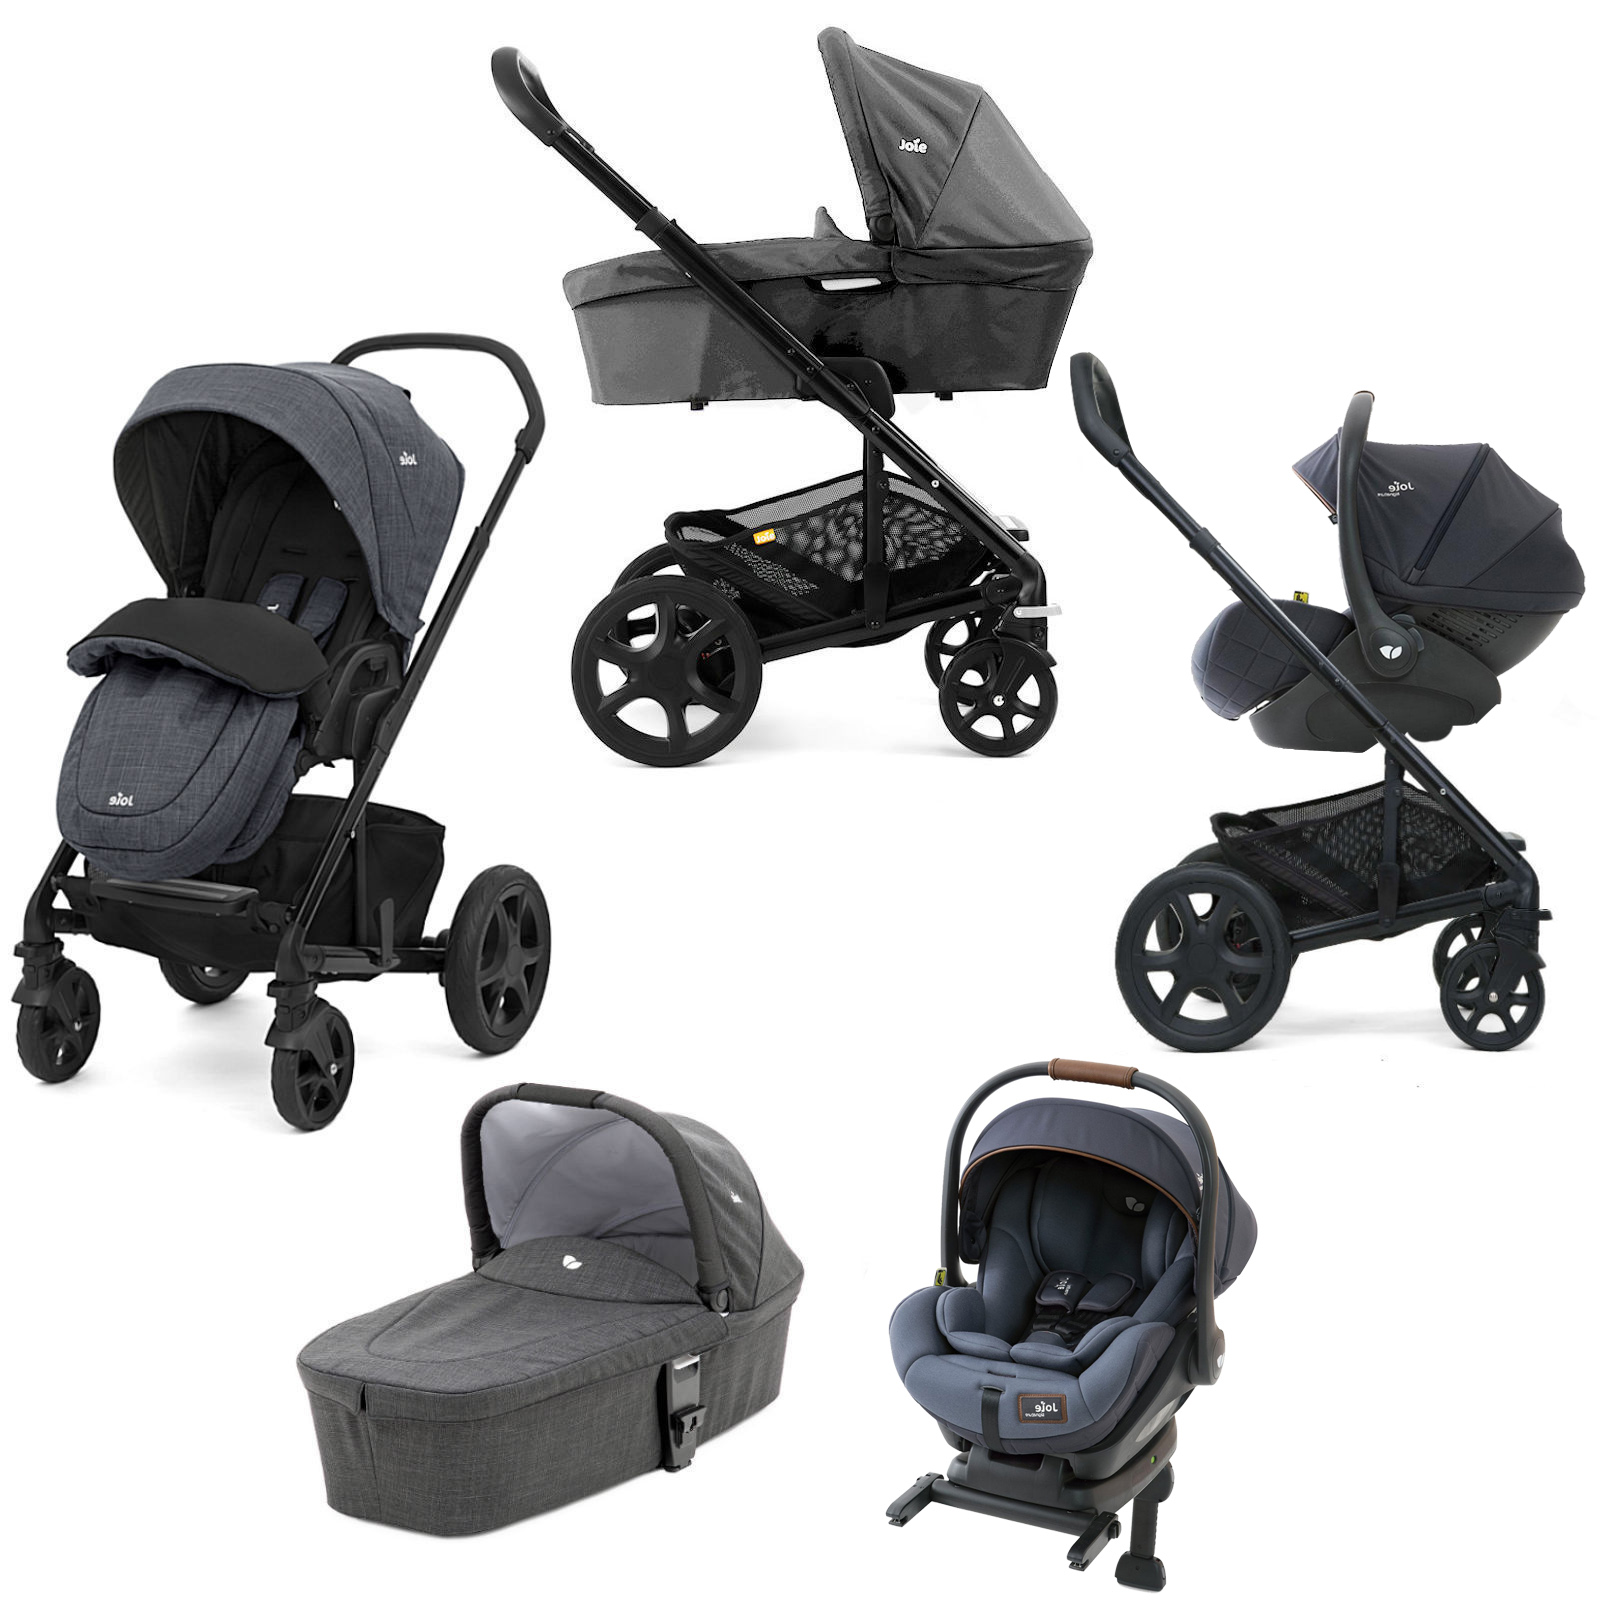 joie travi stroller review